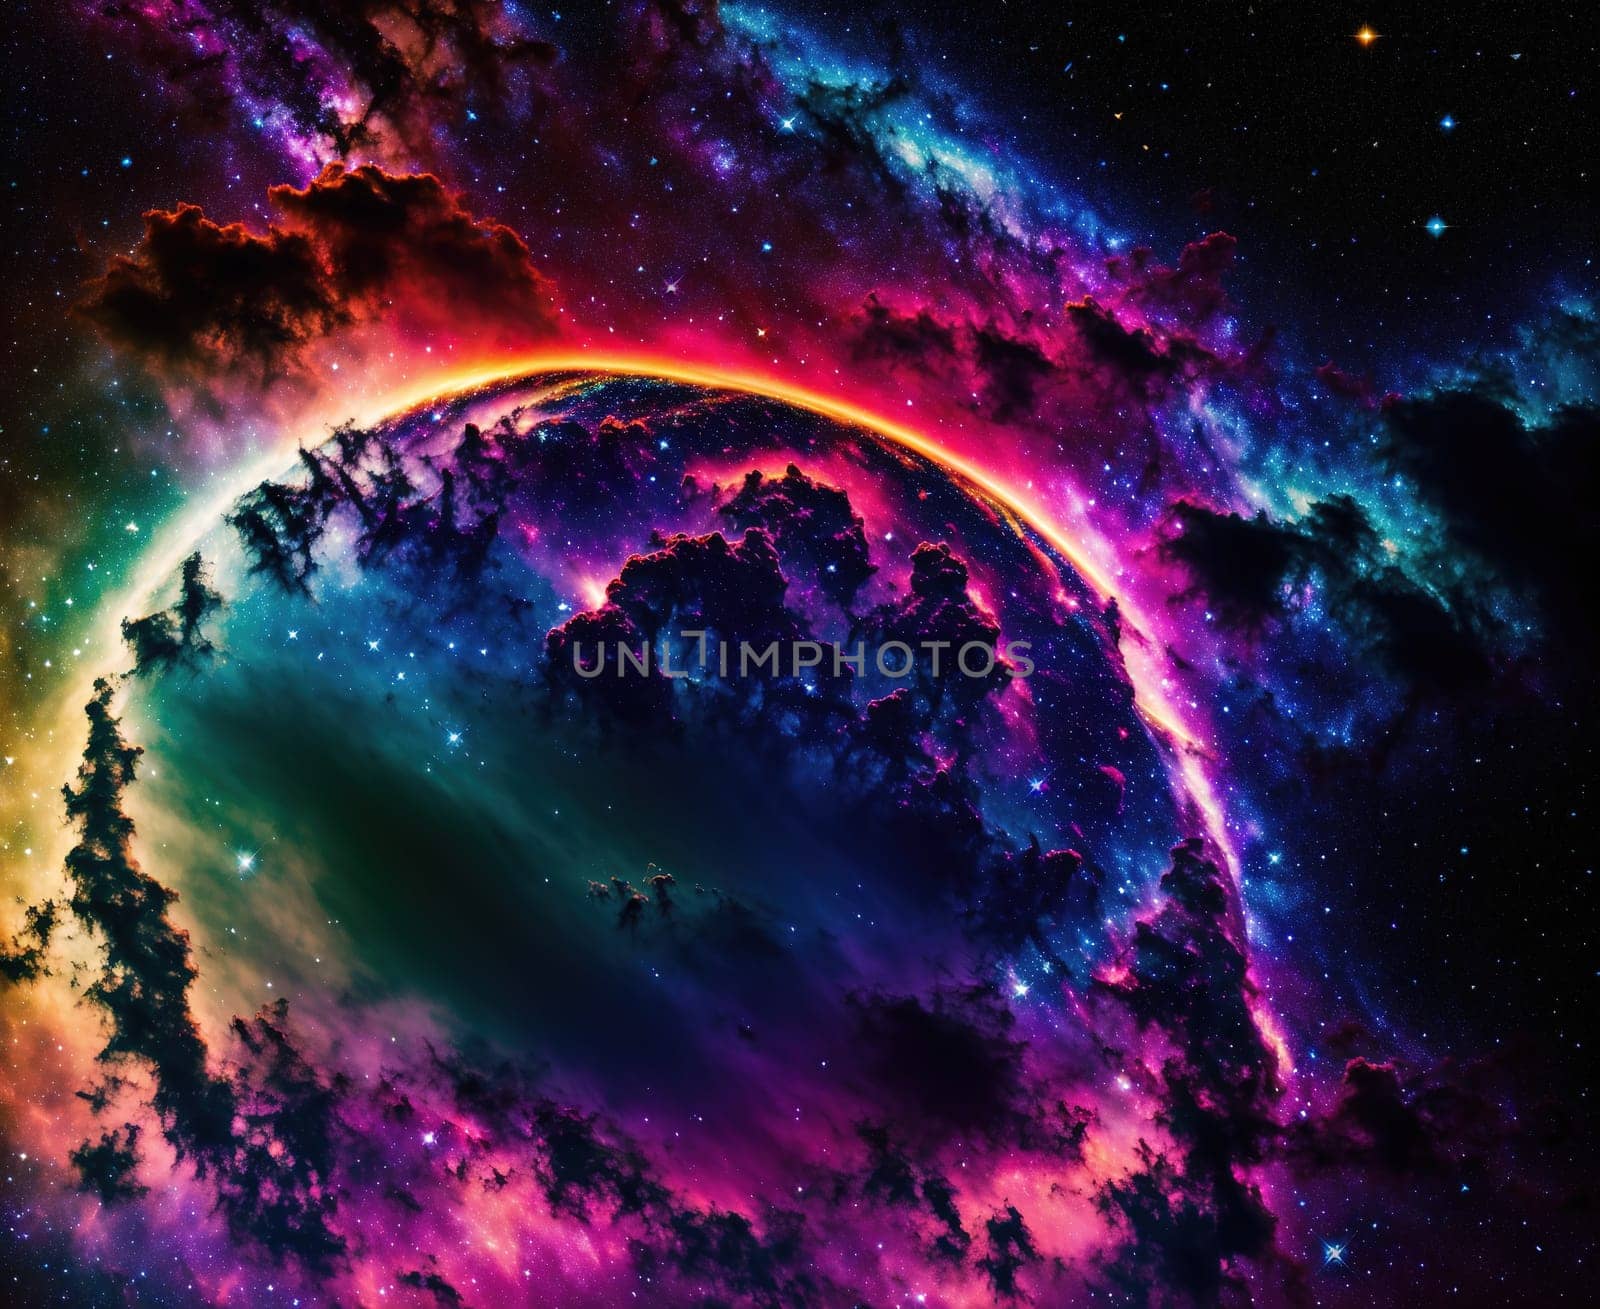 The image depicts a colorful, swirling nebula in the night sky.